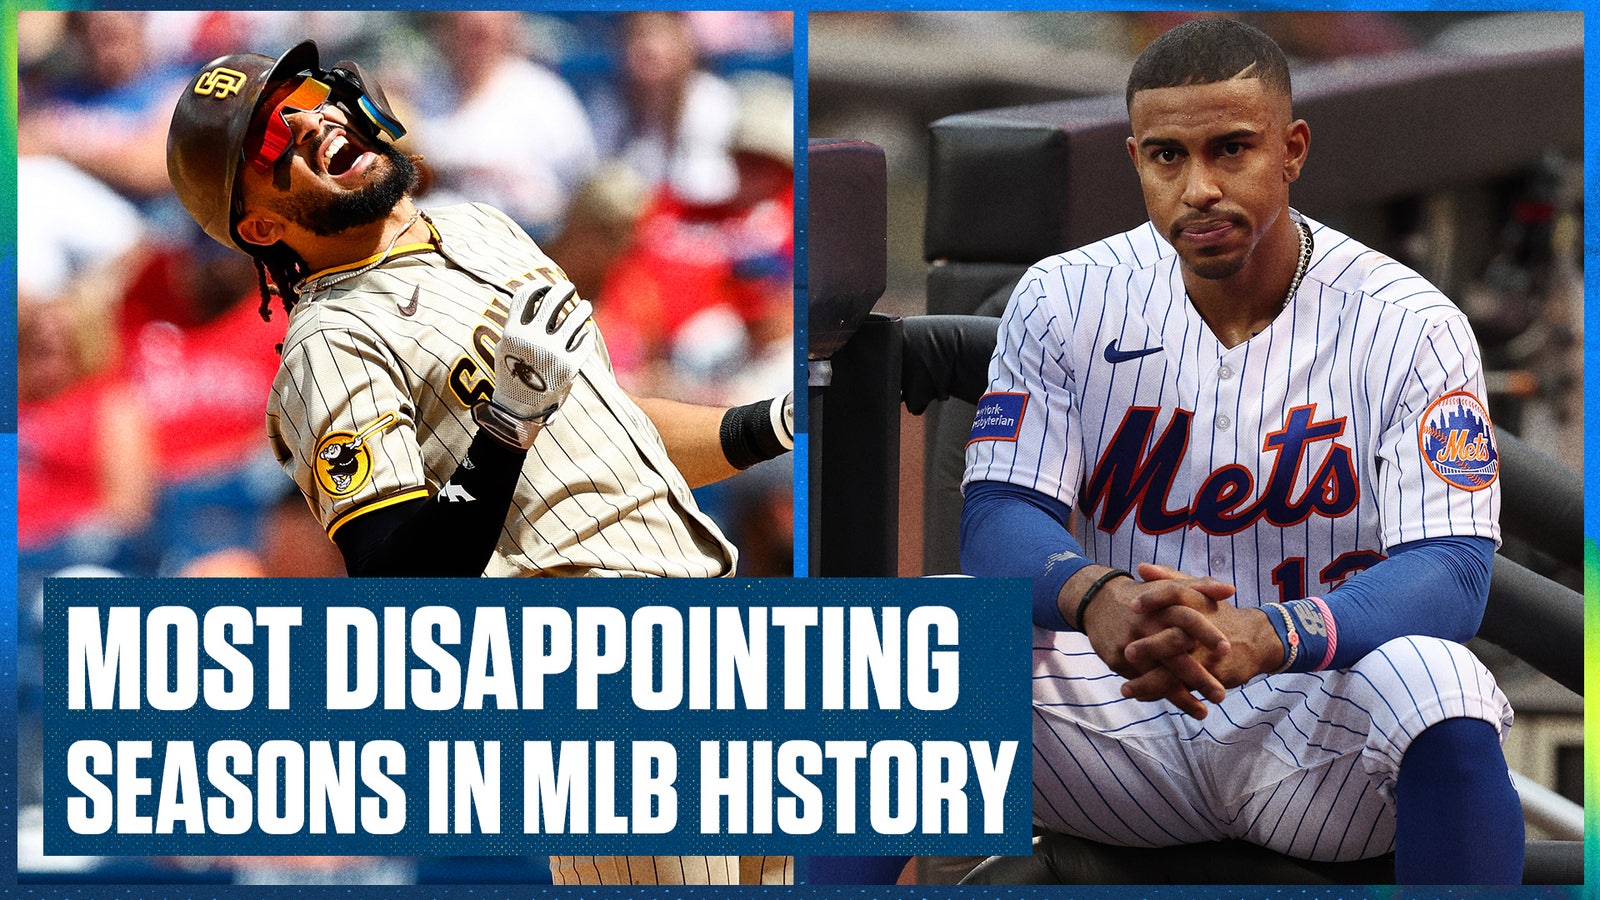 San Diego Padres & New York Mets have the 2 most disappointing seasons in MLB History